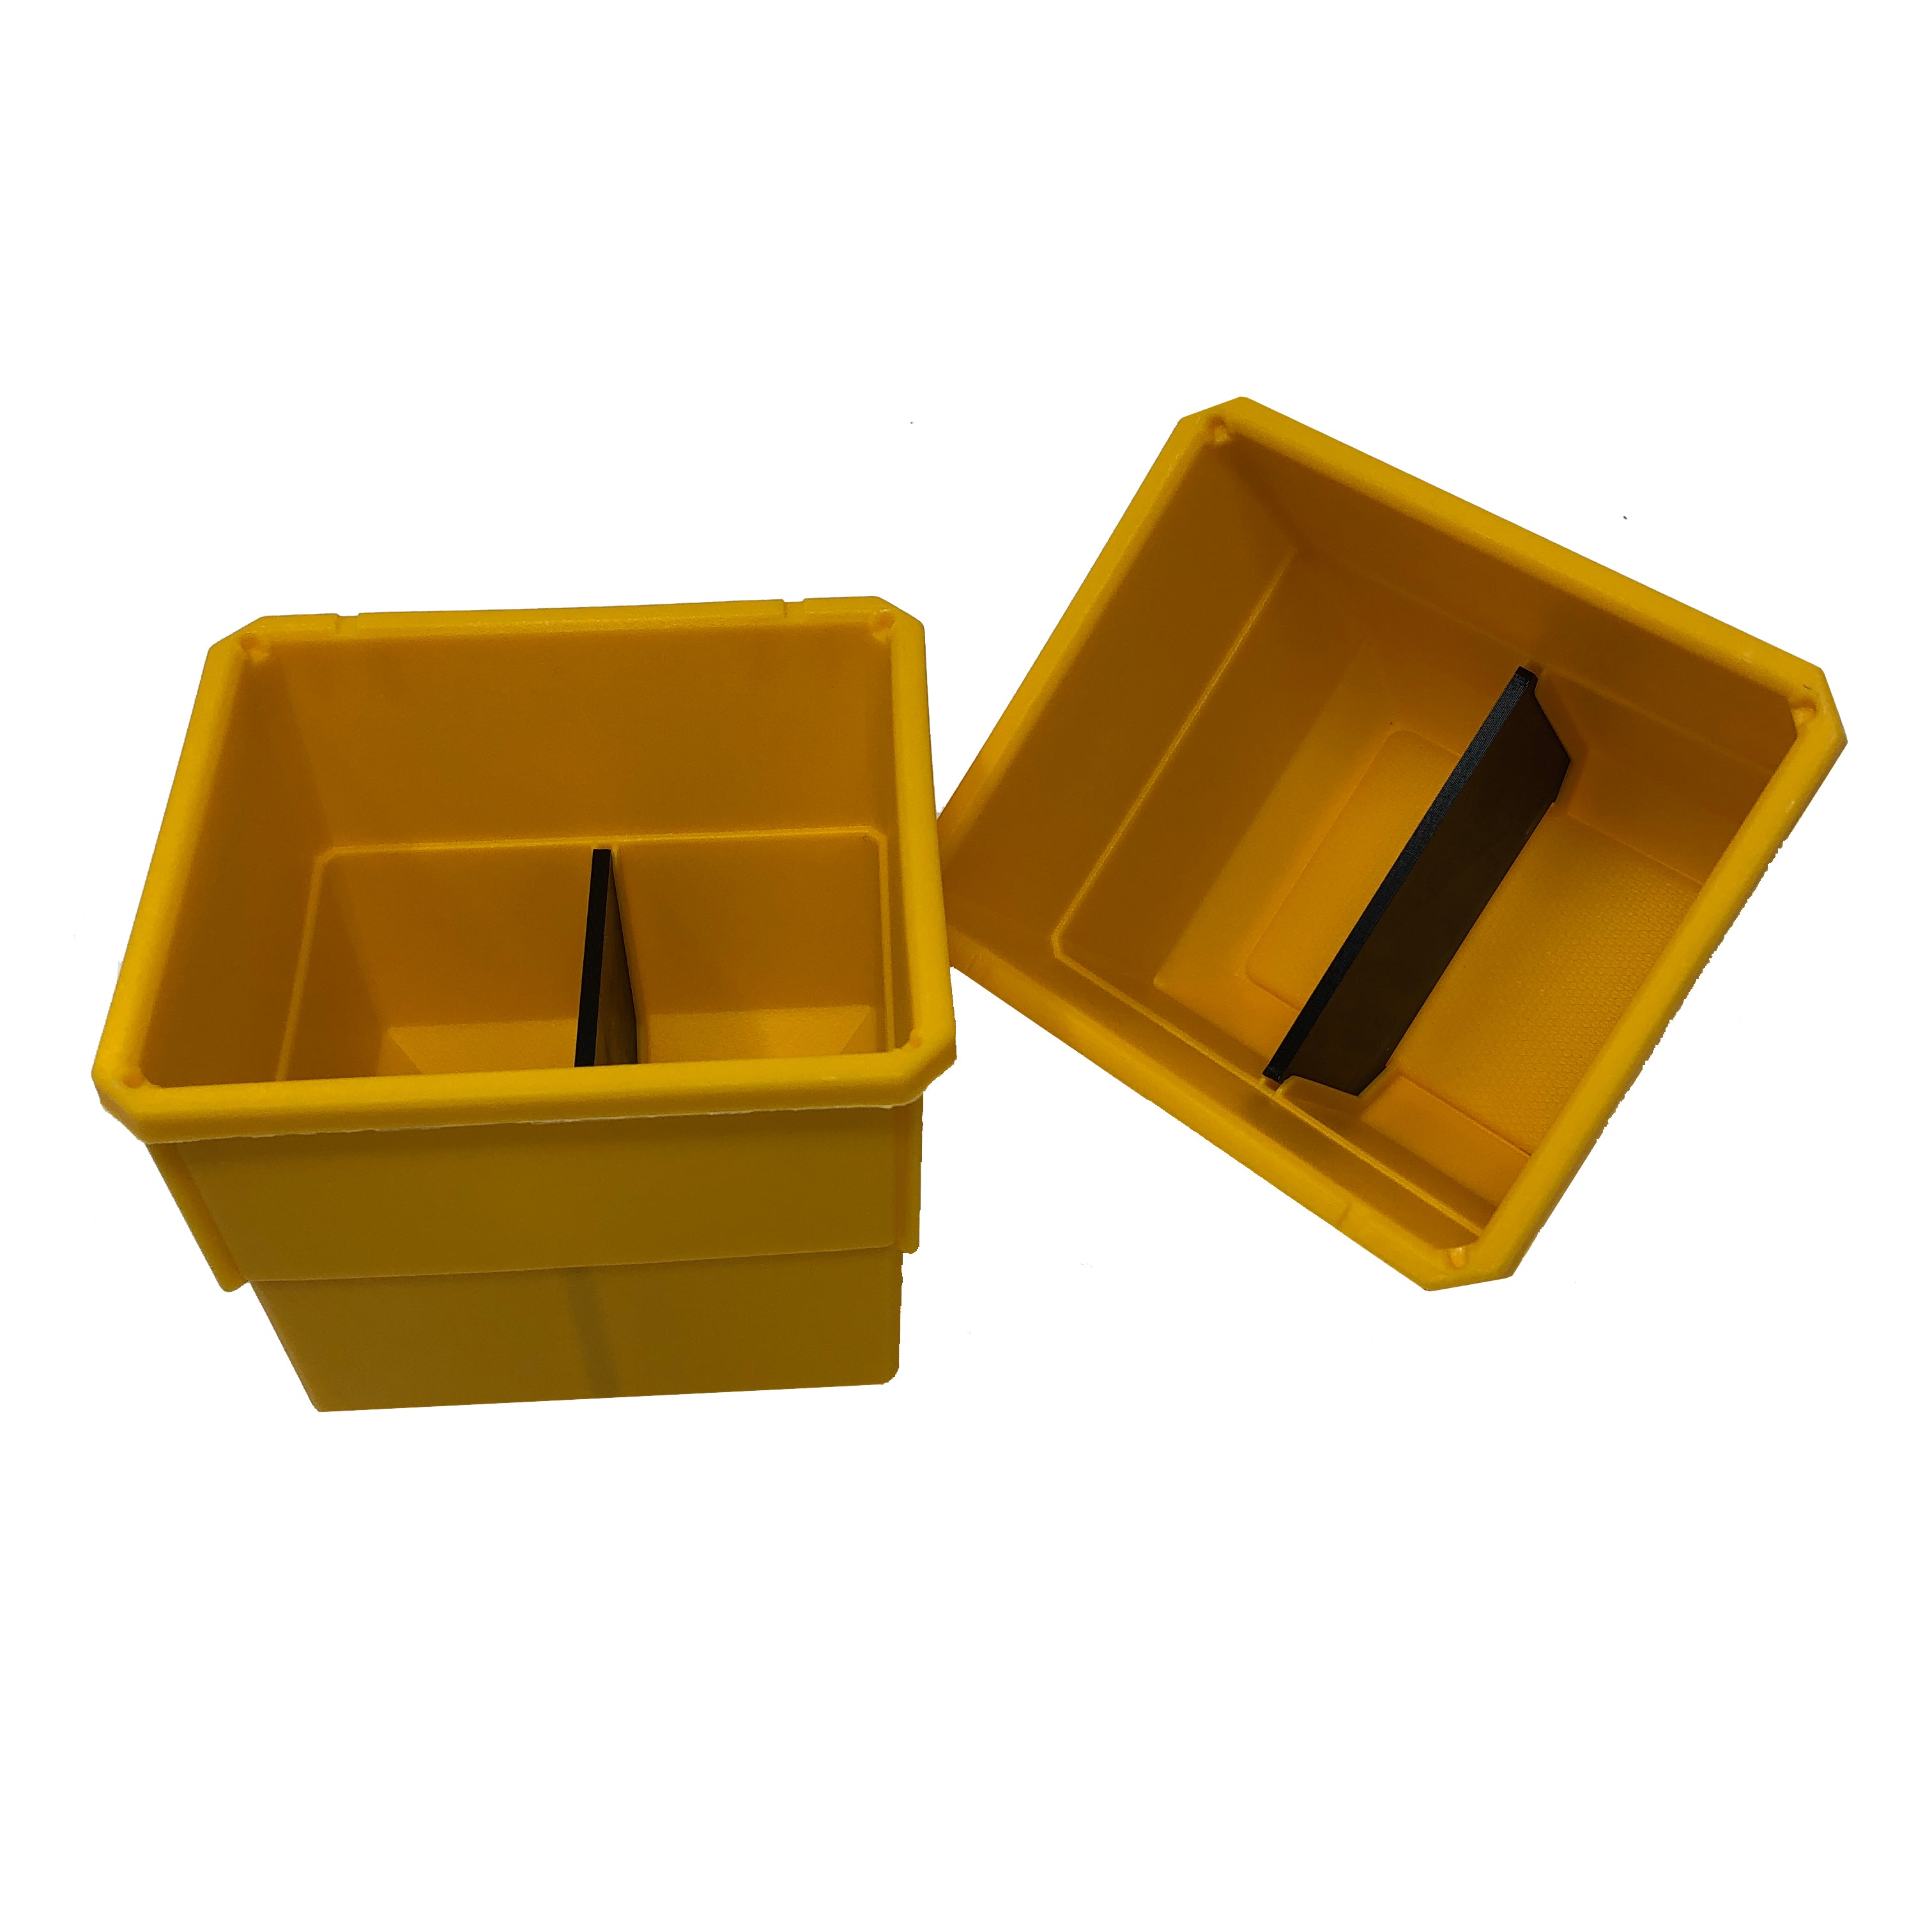 Stock Plastic Bins with Dividers